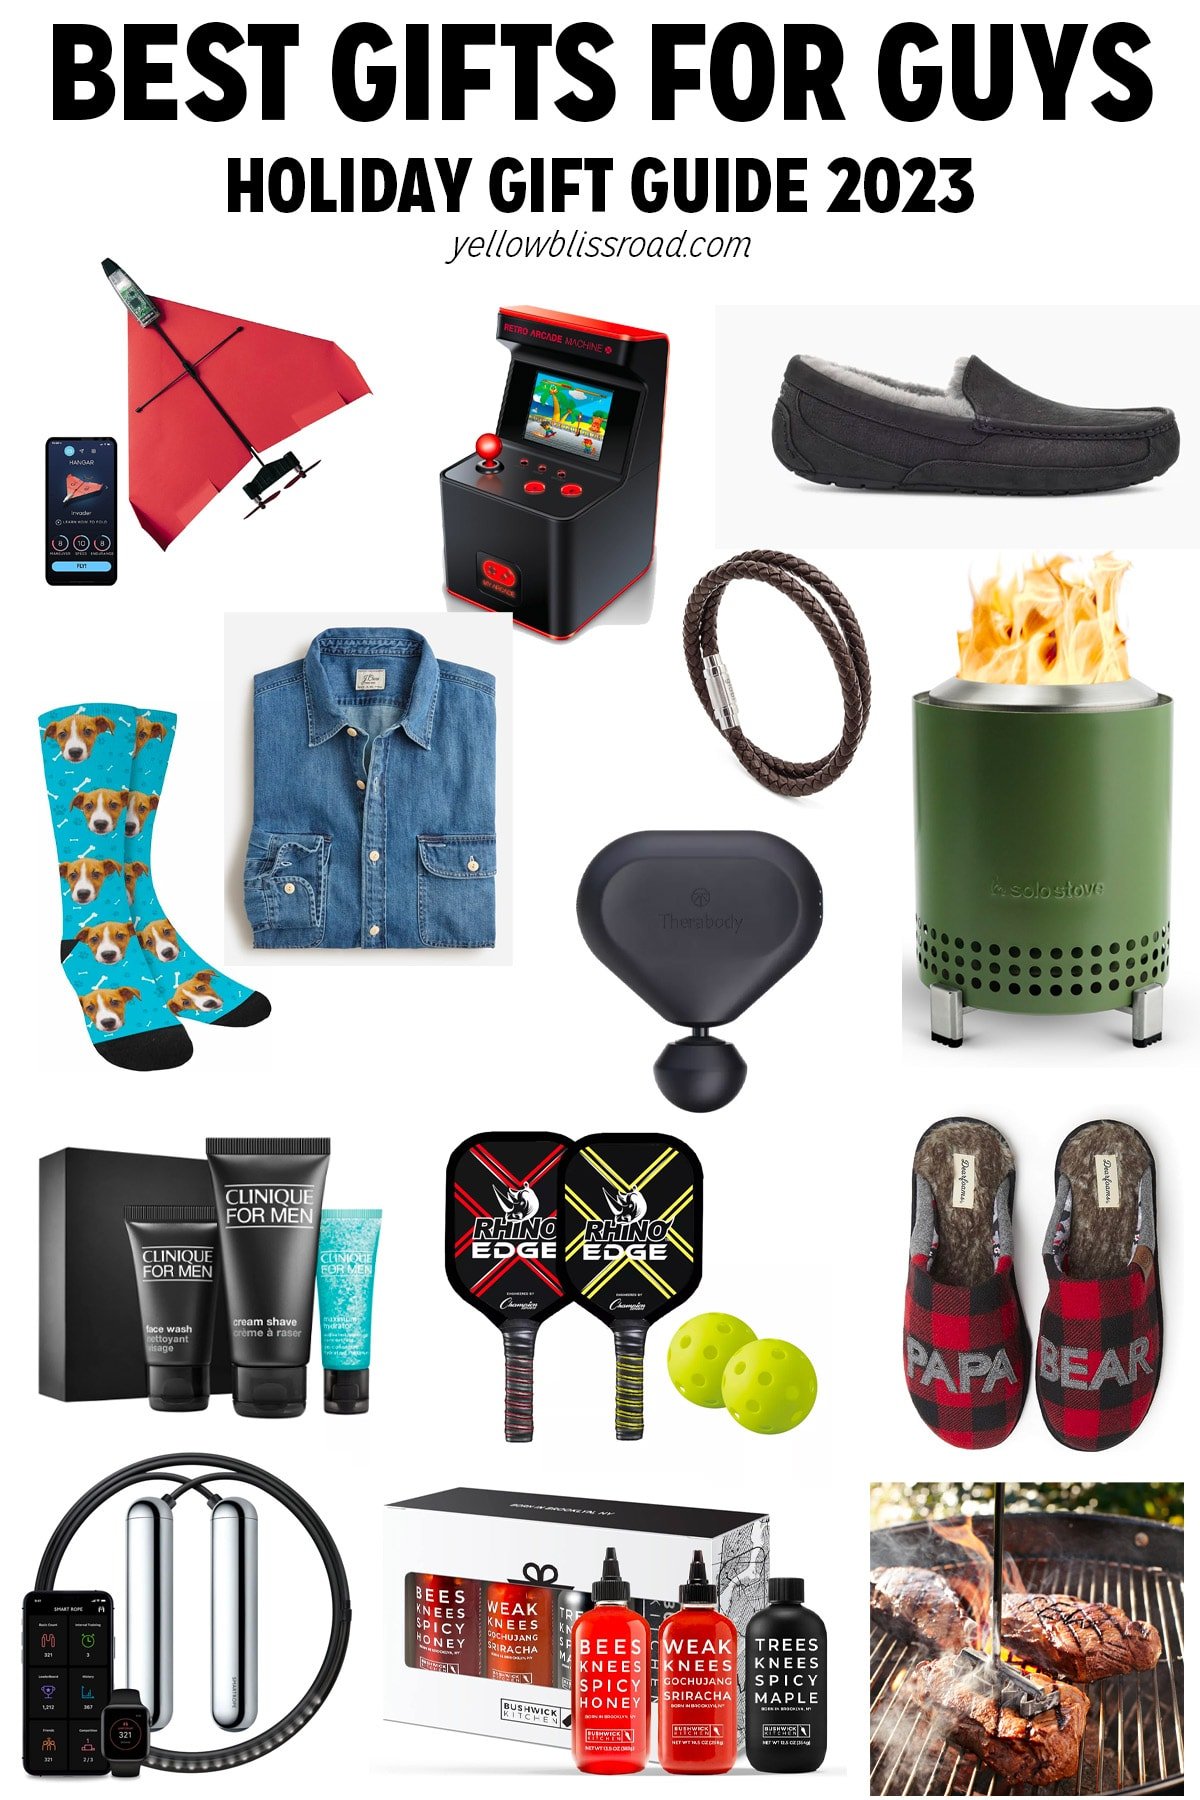 Shop The Best Holiday Gift Guide for Him